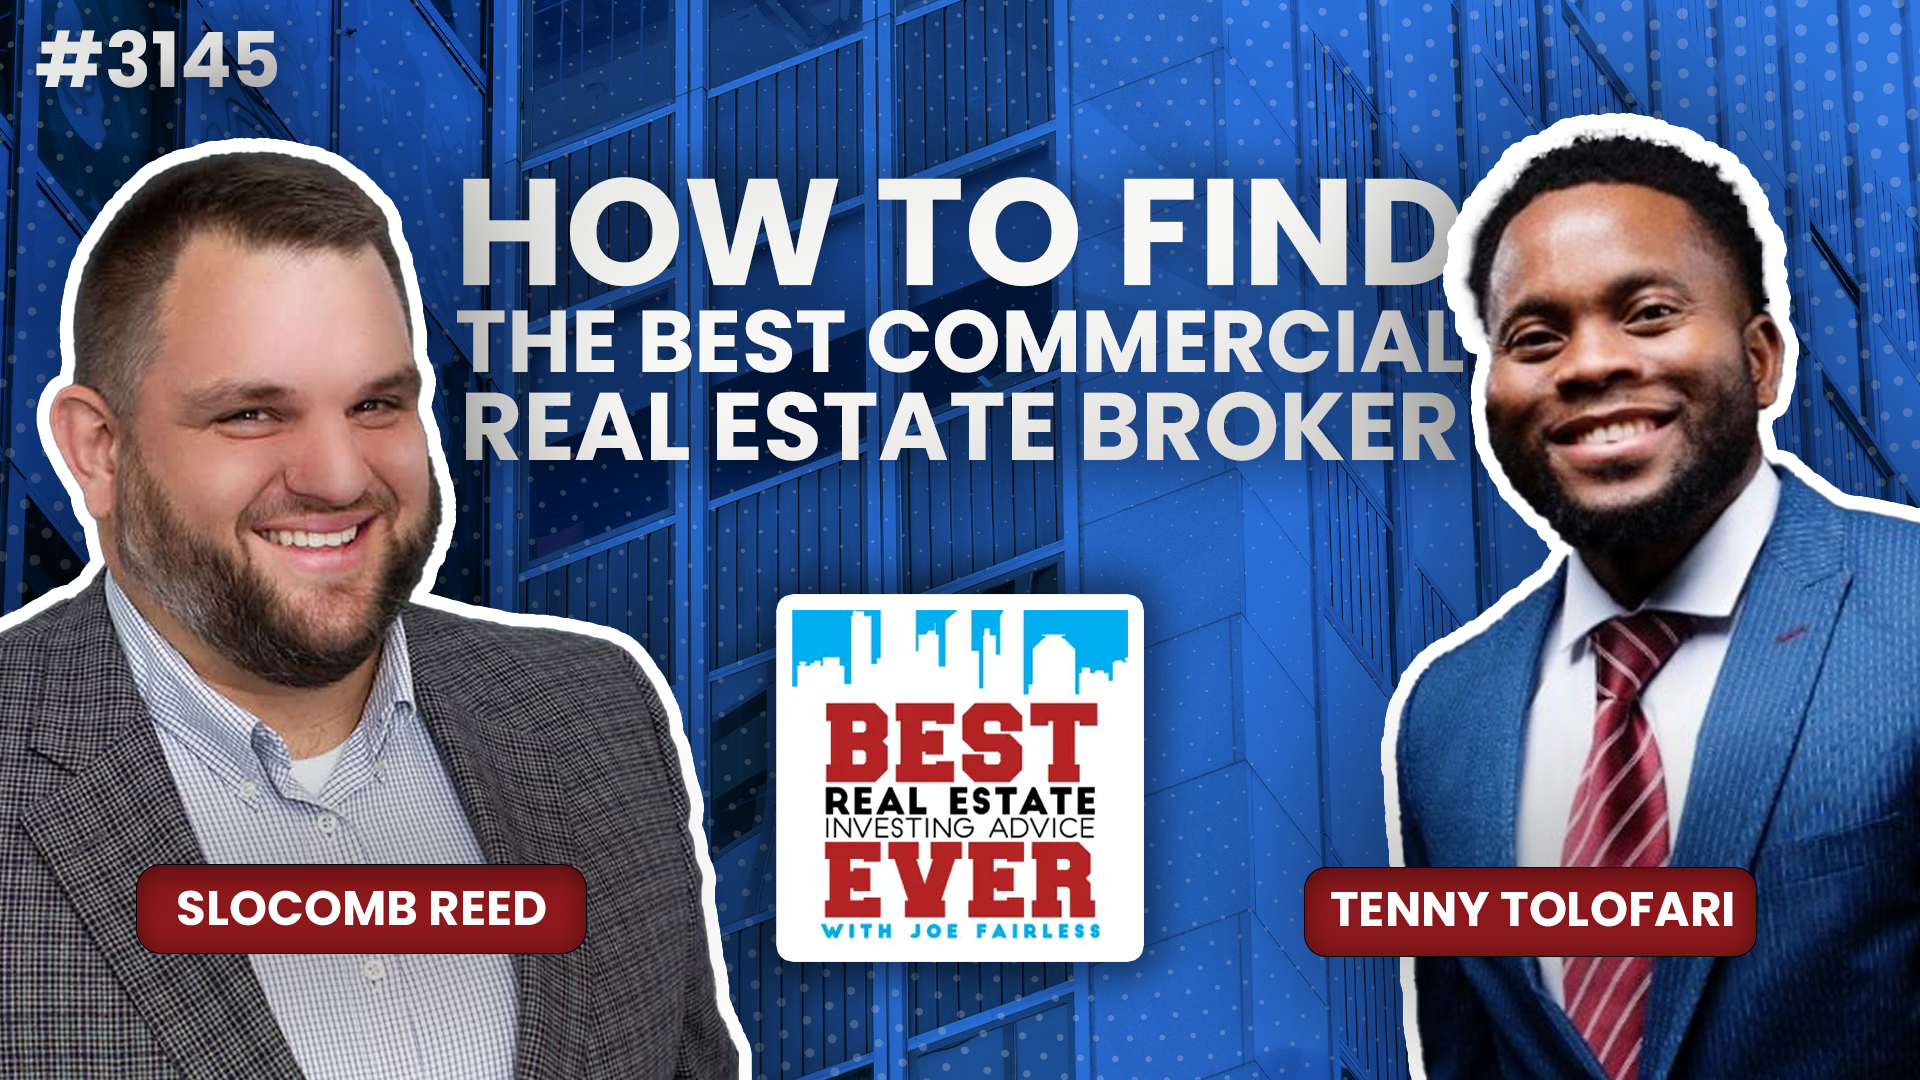 JF3145: How to Find the Best Commercial Real Estate Broker ft. Tenny Tolofari